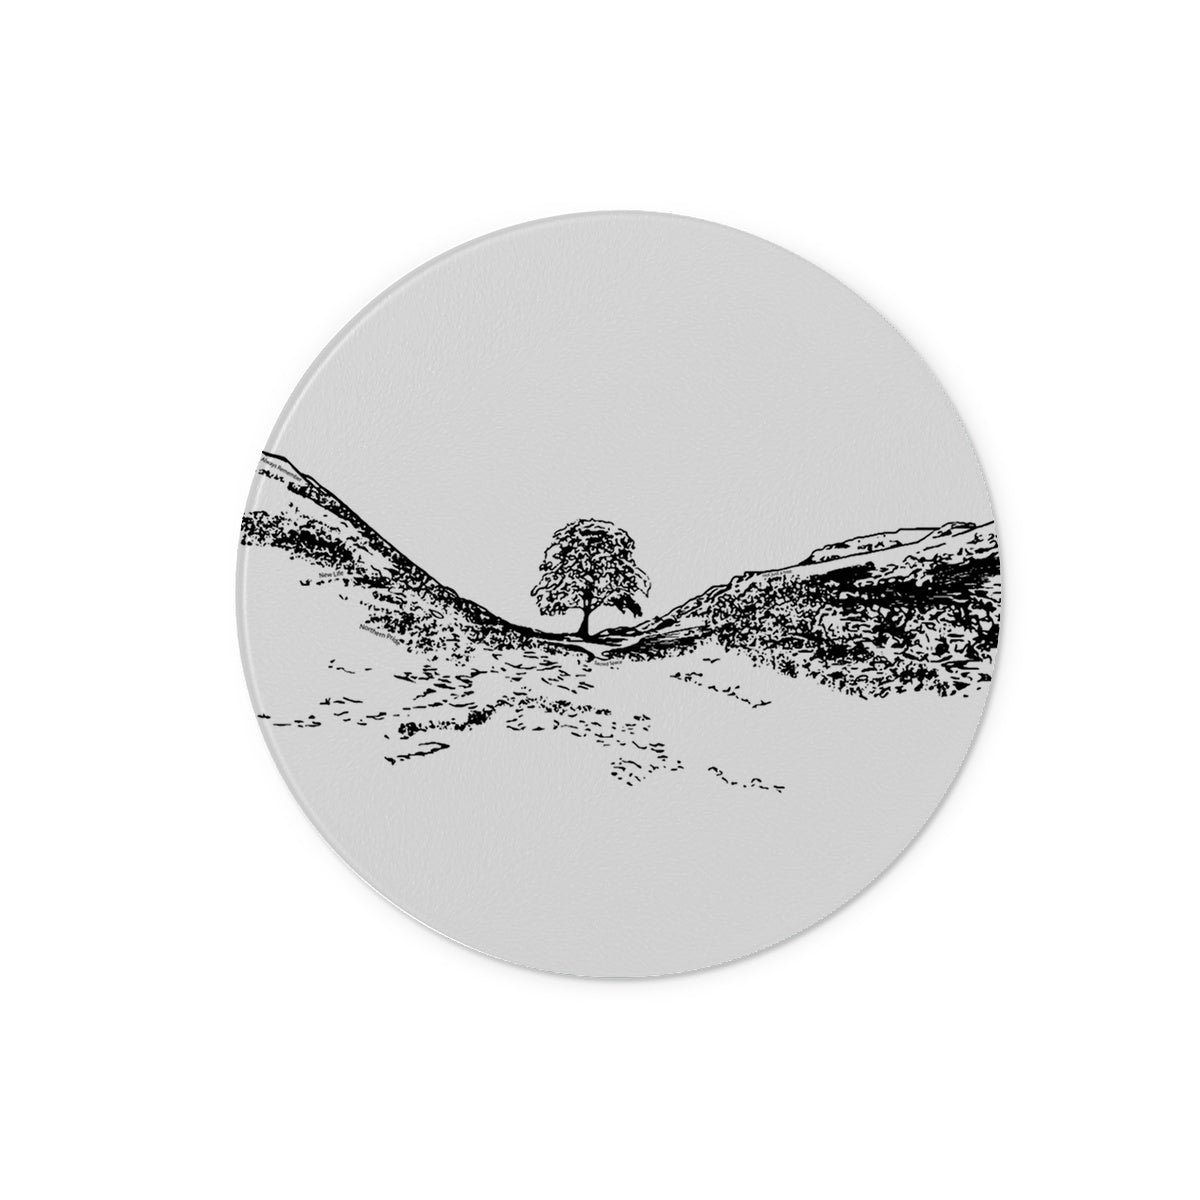 Sycamore Gap themed coaster featuring a Sycamore Gap design by Powder Butterfly